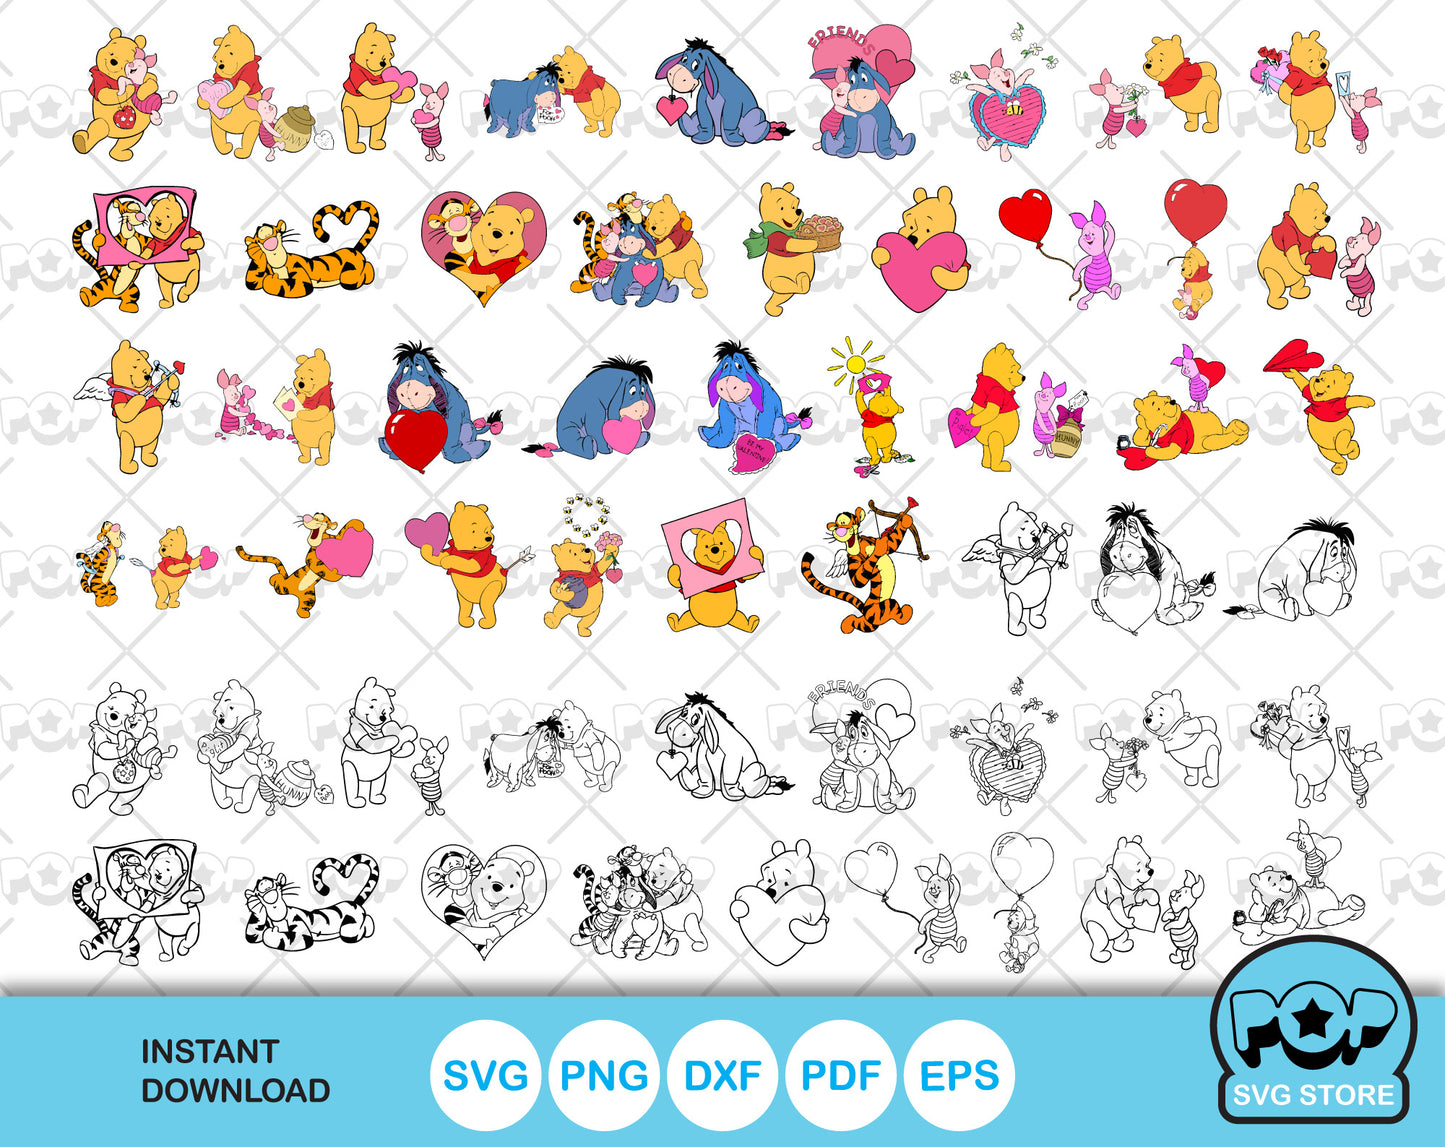 Pooh and Friends Valentine's Day 60 cliparts set, Valentines Day SVG cut files for Cricut / Silhouette, Winnie the Pooh svg, PNG, DXF